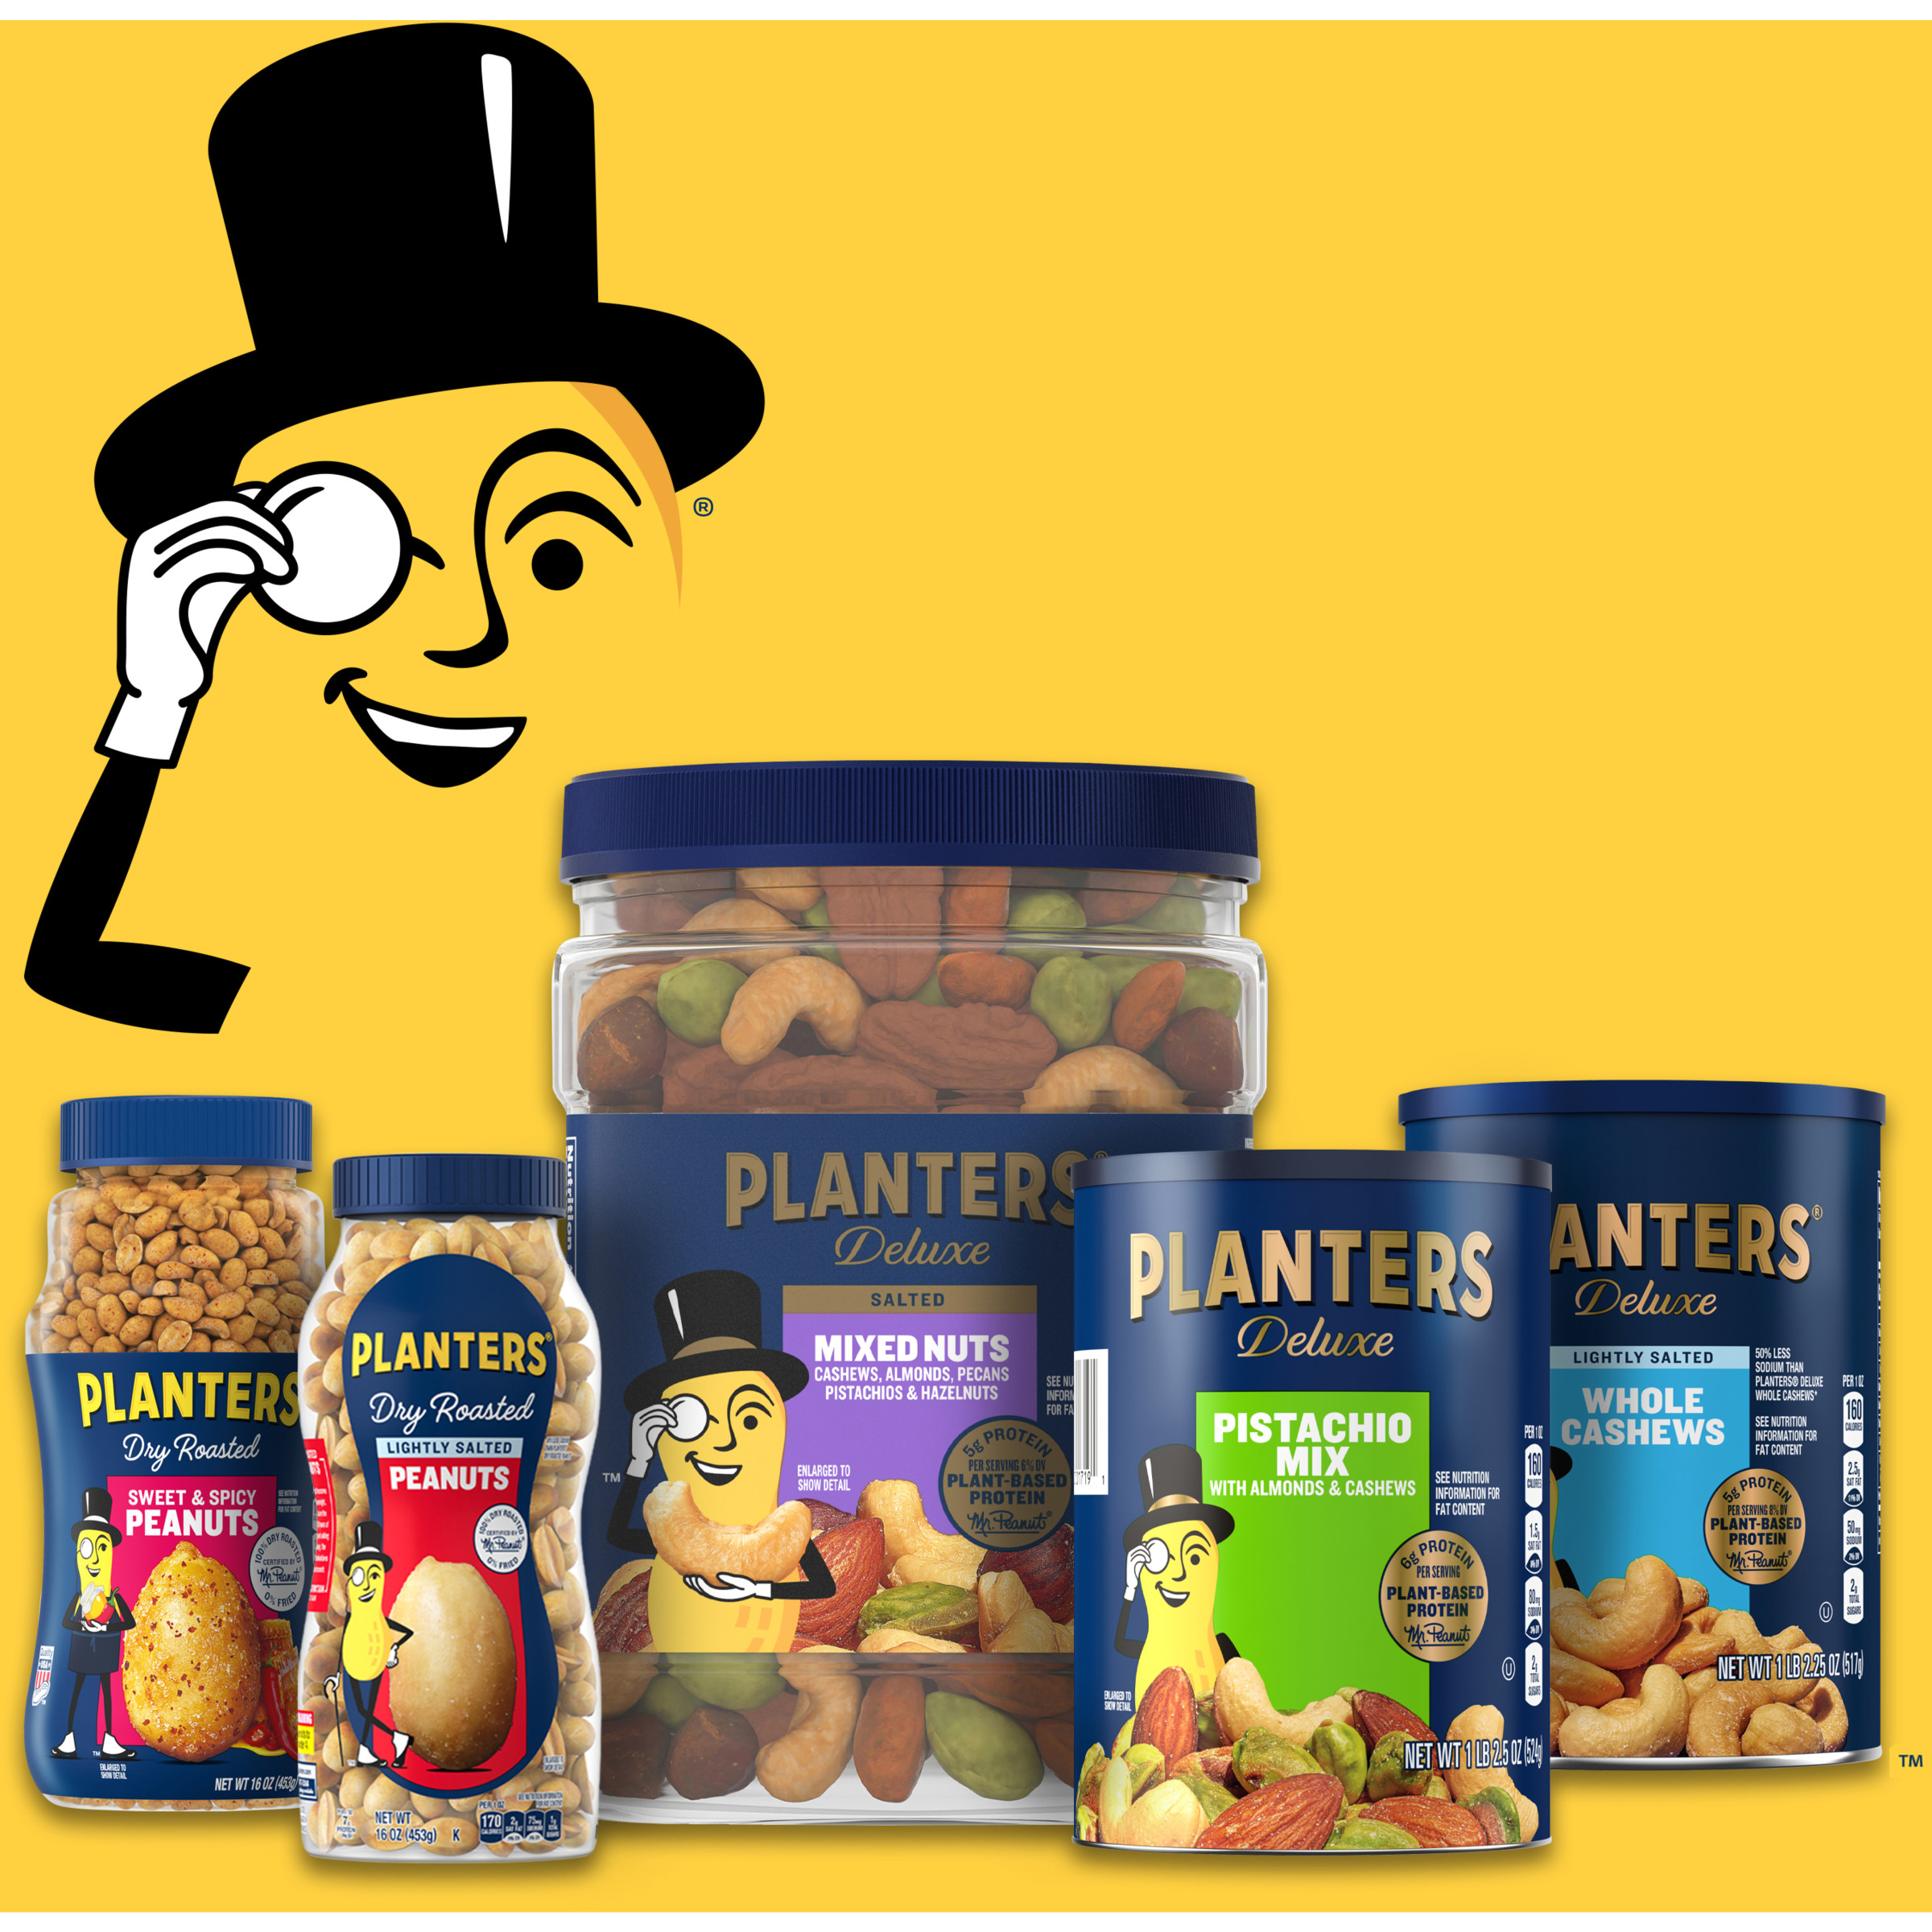 PLANTERS Deluxe Salted Whole Cashews, Party Snacks, Plant-Based Protein 18.25oz (1 Canister) - image 4 of 15